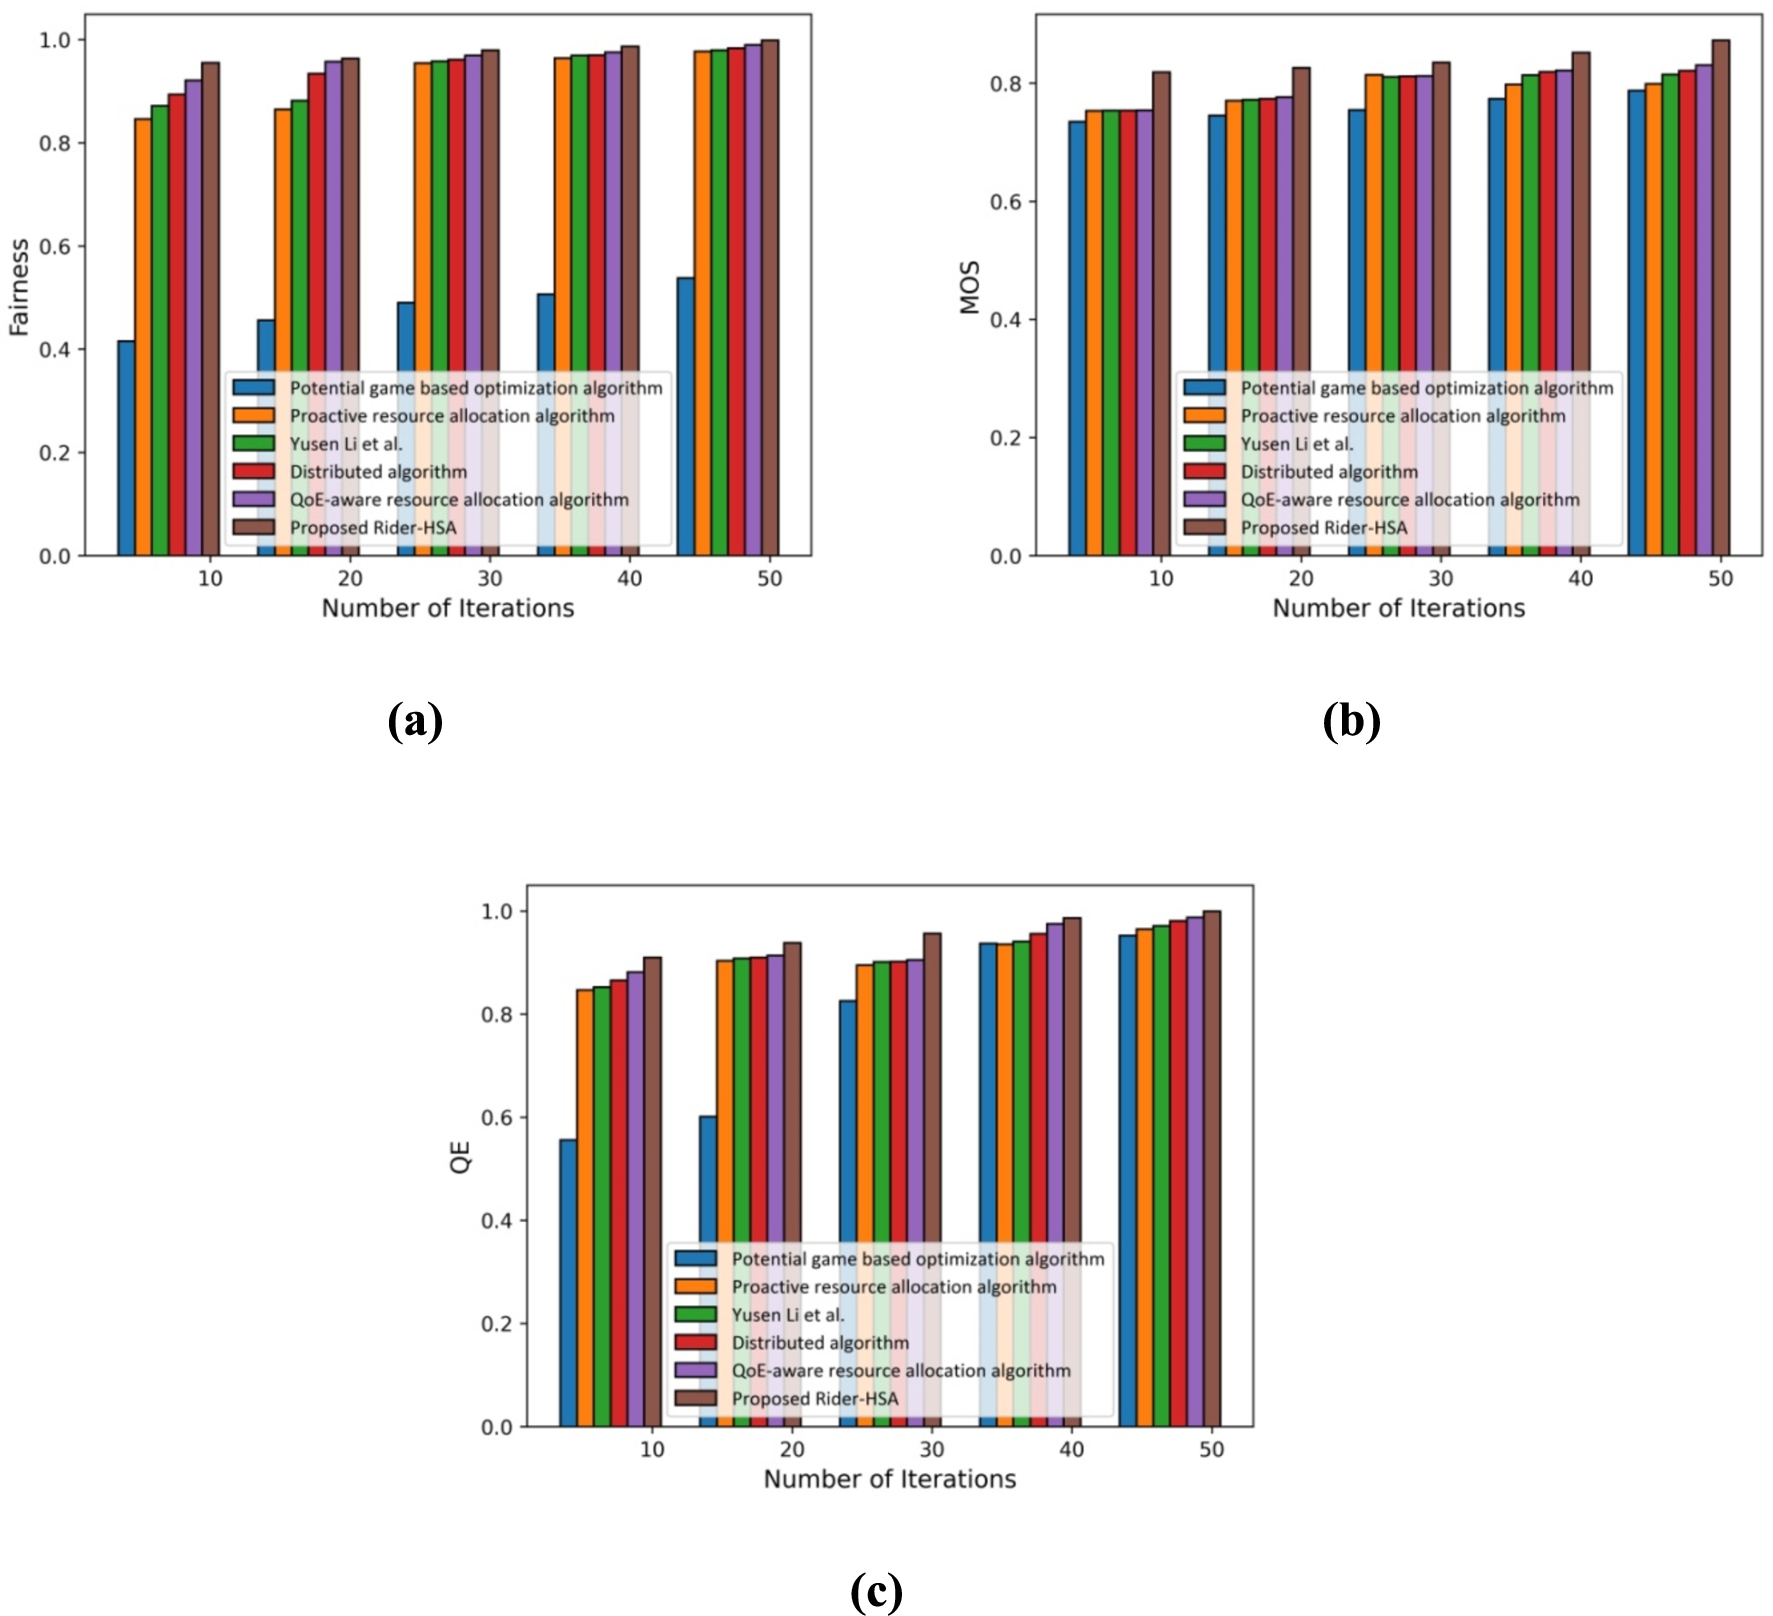 Analysis of methods with game size 300 using a) Fairness, b) MOS, c) QE.